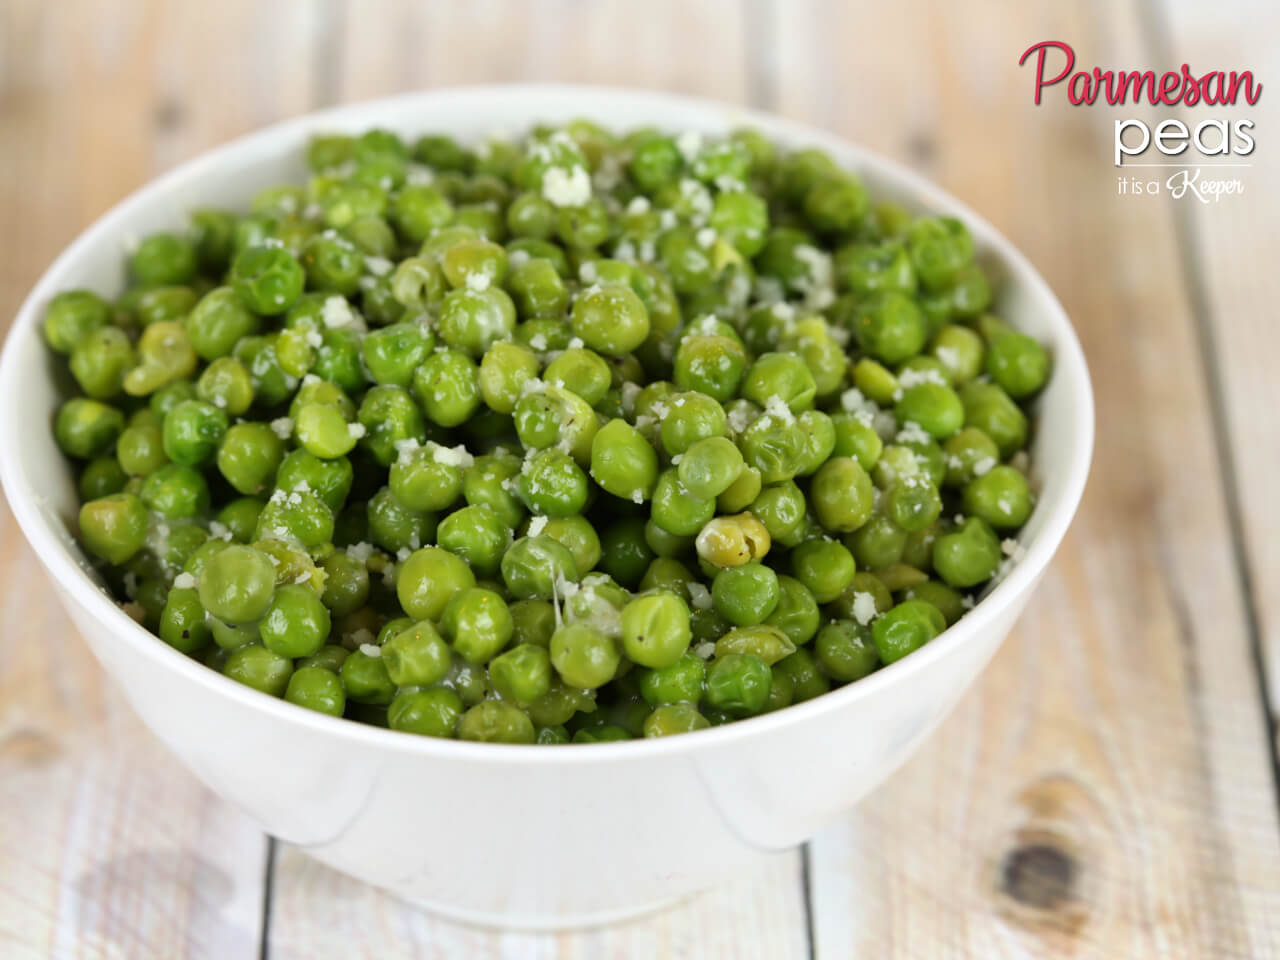 Parmesan Peas - this is one of my family's favorite easy side dish recipes